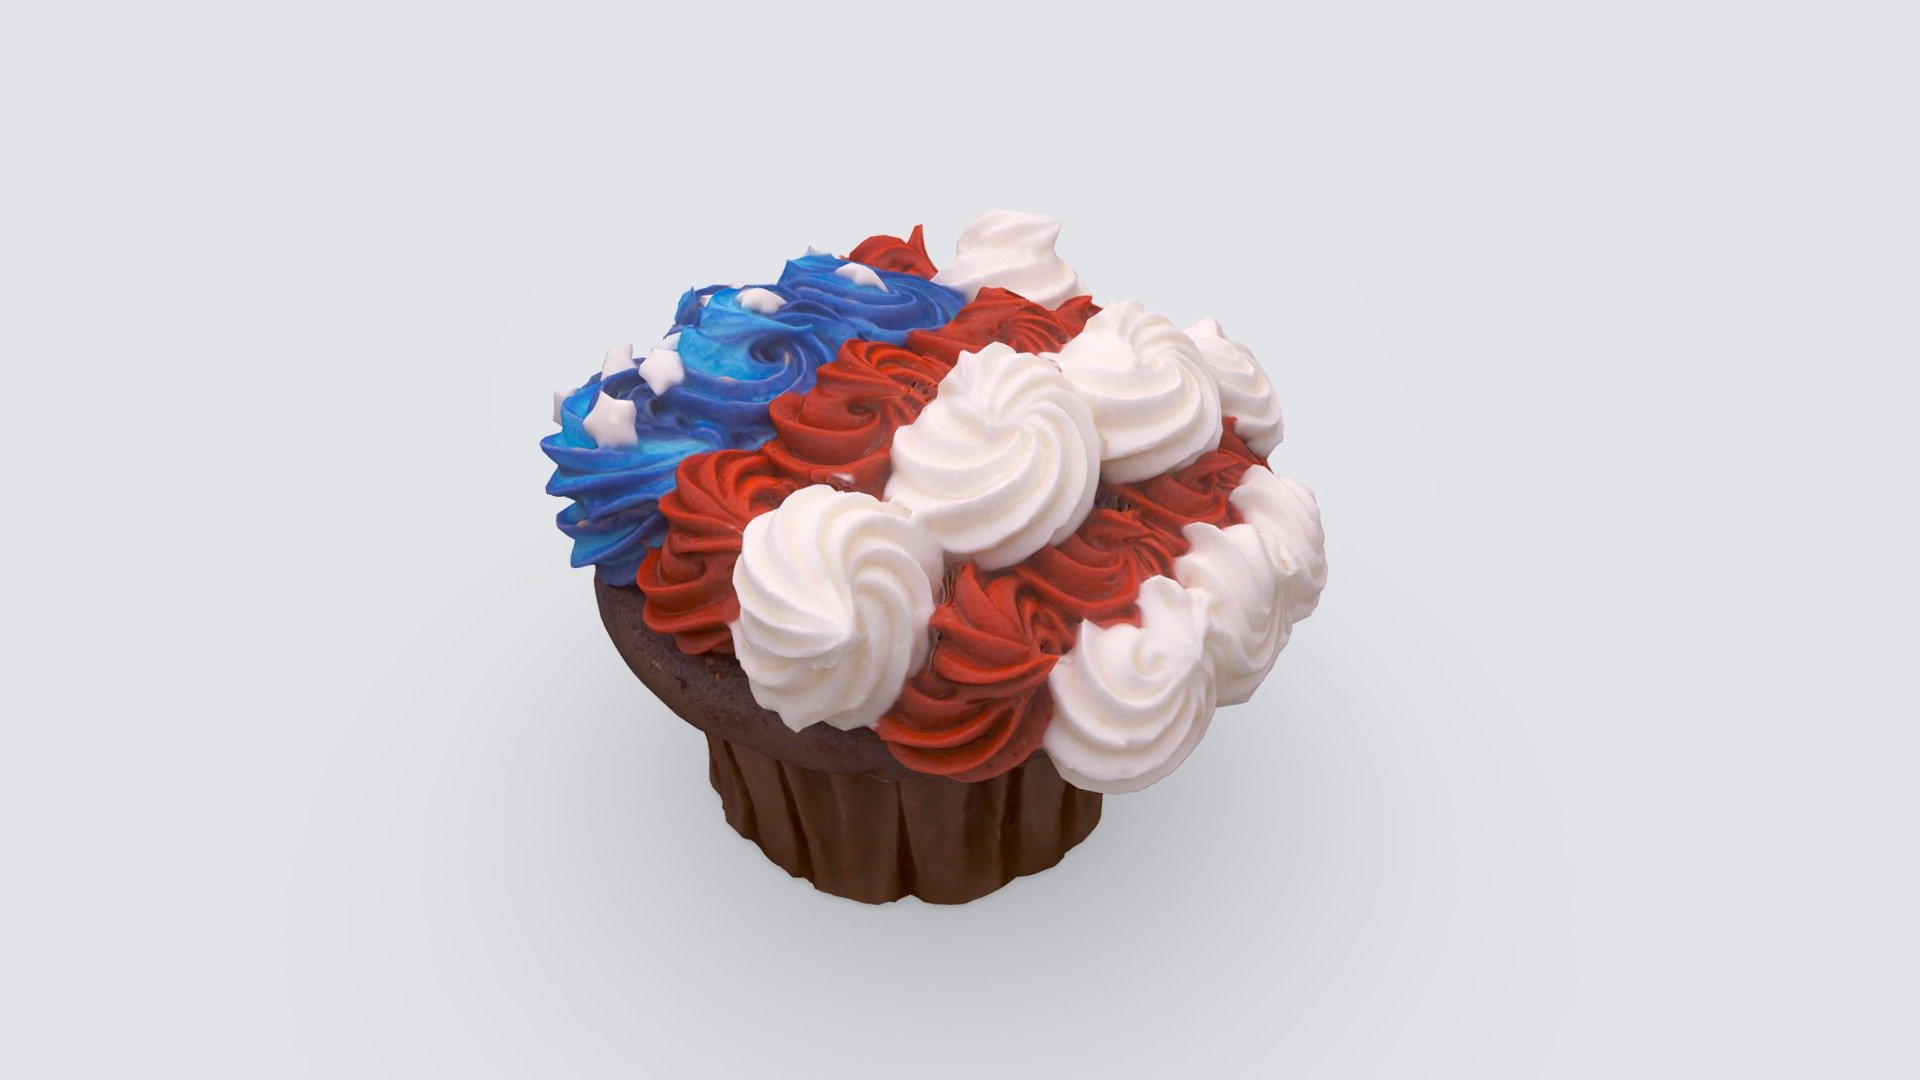 Election Day Cupcake.. I love how a small amount of effort into existing model by @appeteyes brings such a great outcome and changes the look of a cupcake.
Final touches with Tools: 

Agisoft photoscan, 3ds max, mudbox.
You can place it on your shelf in your favorite VR / AR space, if you like. It's free to download. :)

Specifications



.FBX



Decimated to 40k polygons



Retopology and UVW unwrapping have been done. 



4096x4096 textures have been optimized with A.I. new features to 500kb.



Try it in AR mode! 

Use the Skechfab app, or use one of the @appeteyes Instagram filters that is automatically available to you if you follow appeteyes.me.

Enjoy - Election Day Cake - Buy Royalty Free 3D model by Segrei Vas (@letsrock85) 3d model